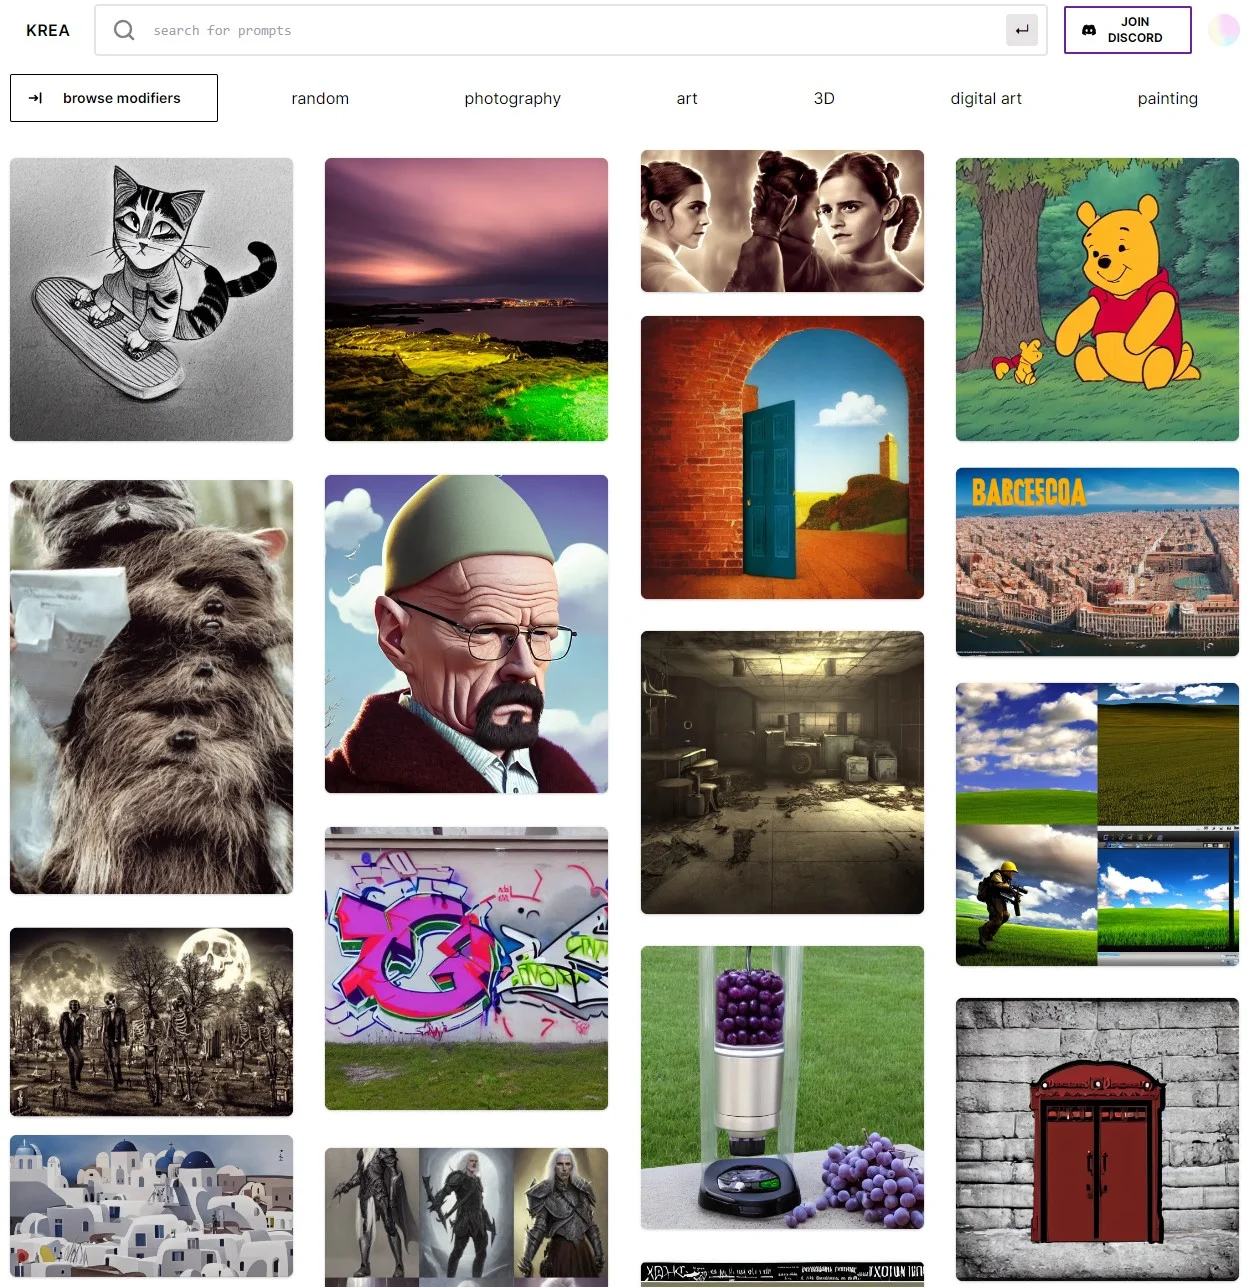 AI image search engine finds great prompts for Stable Diffusion and co.